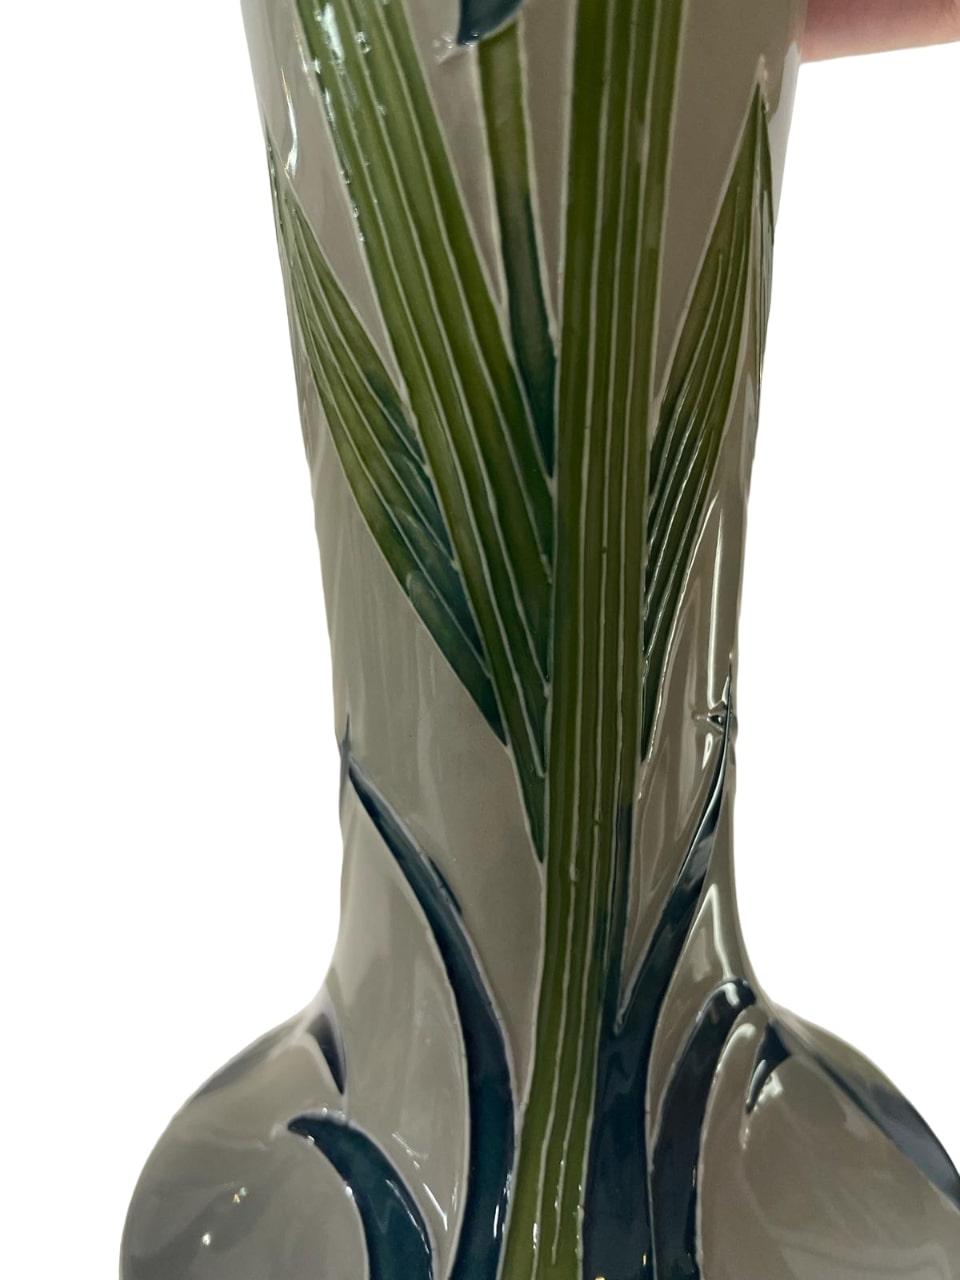 English LIMITED EDITION Moorcroft Green Iris vase, from the Legacy collection dated 2013 For Sale